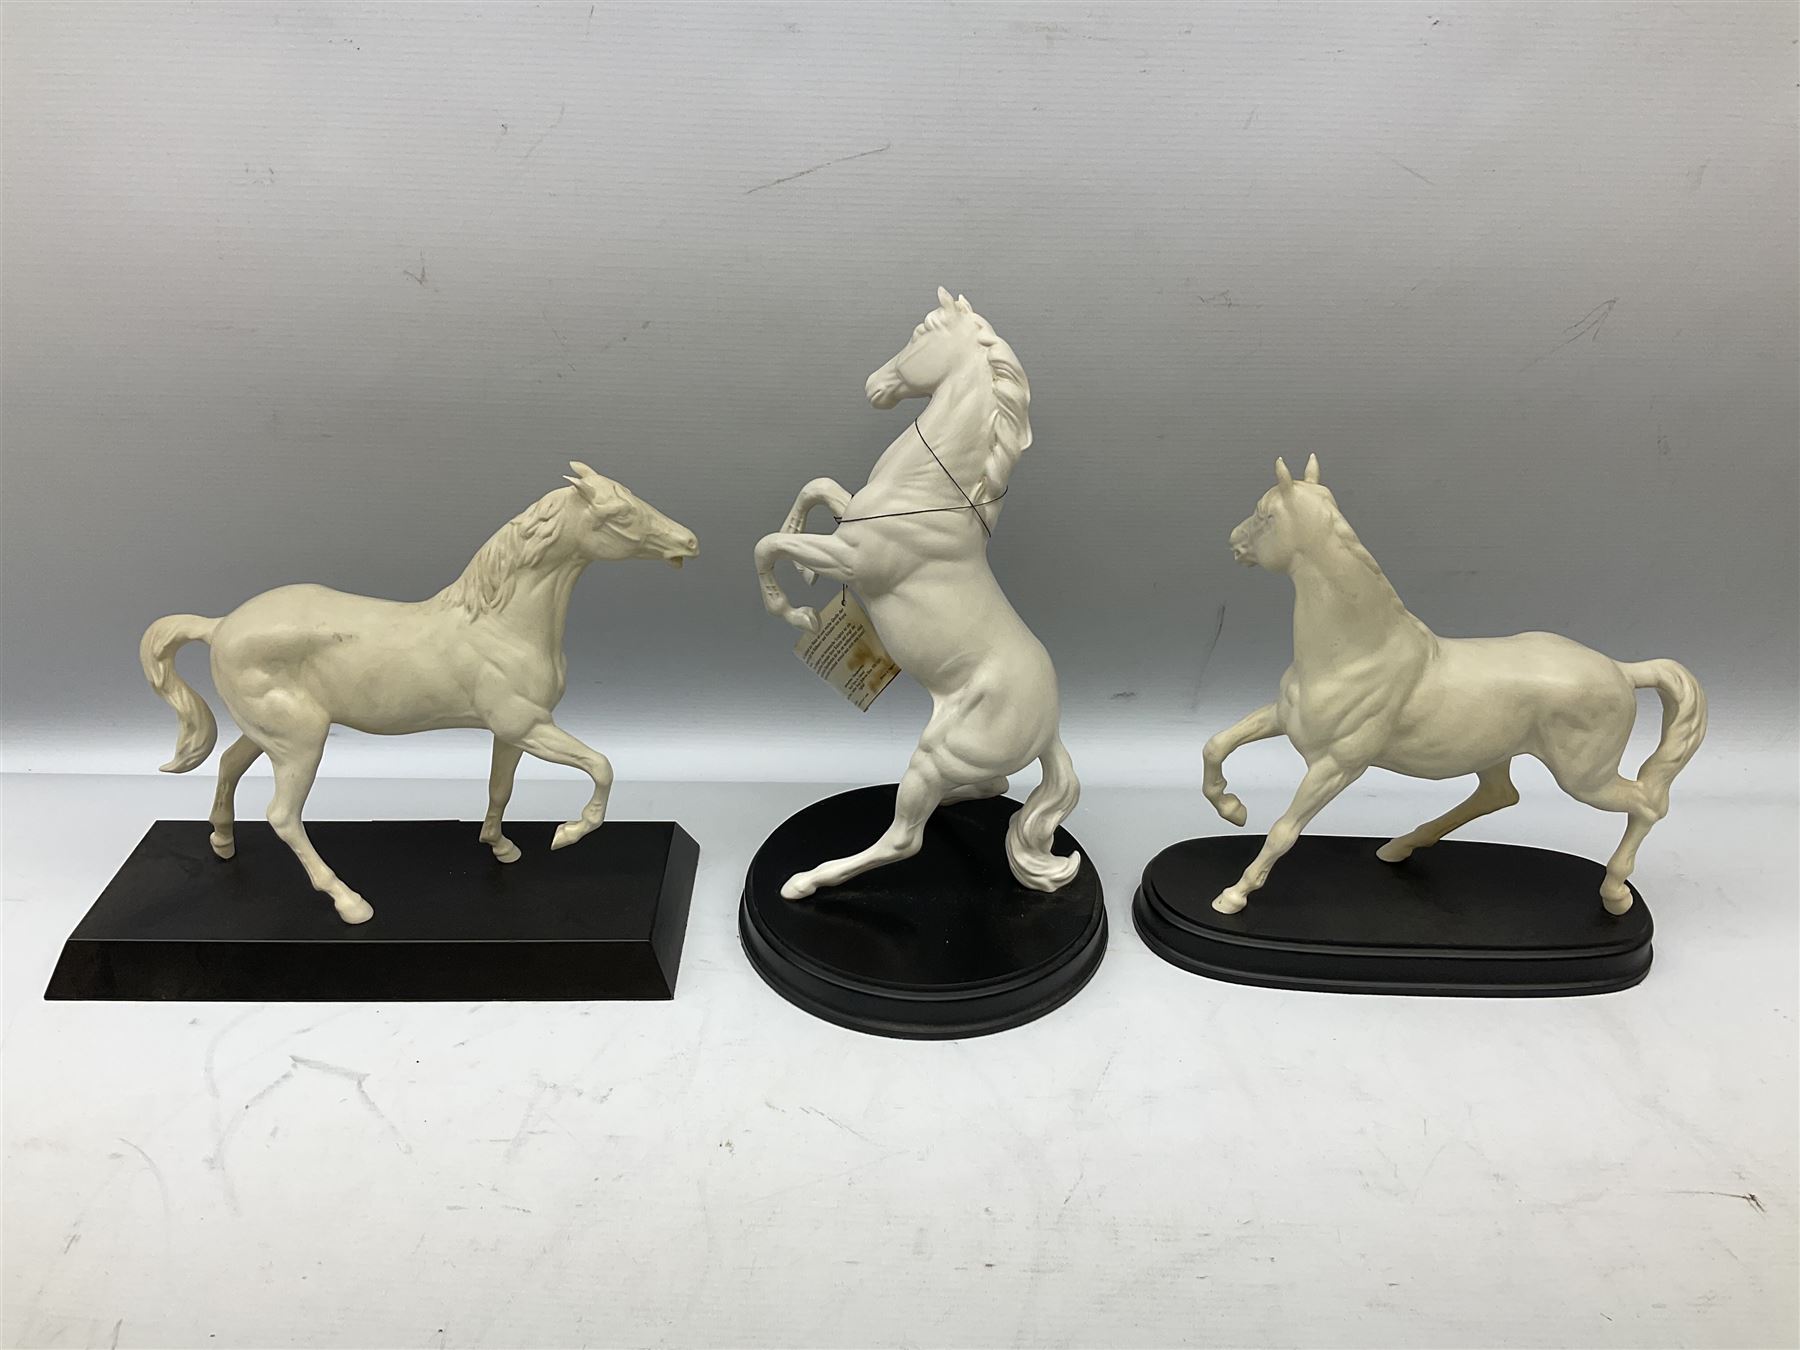 Six Royal Doulton horse figures in a matt finish on plinths - Image 6 of 9